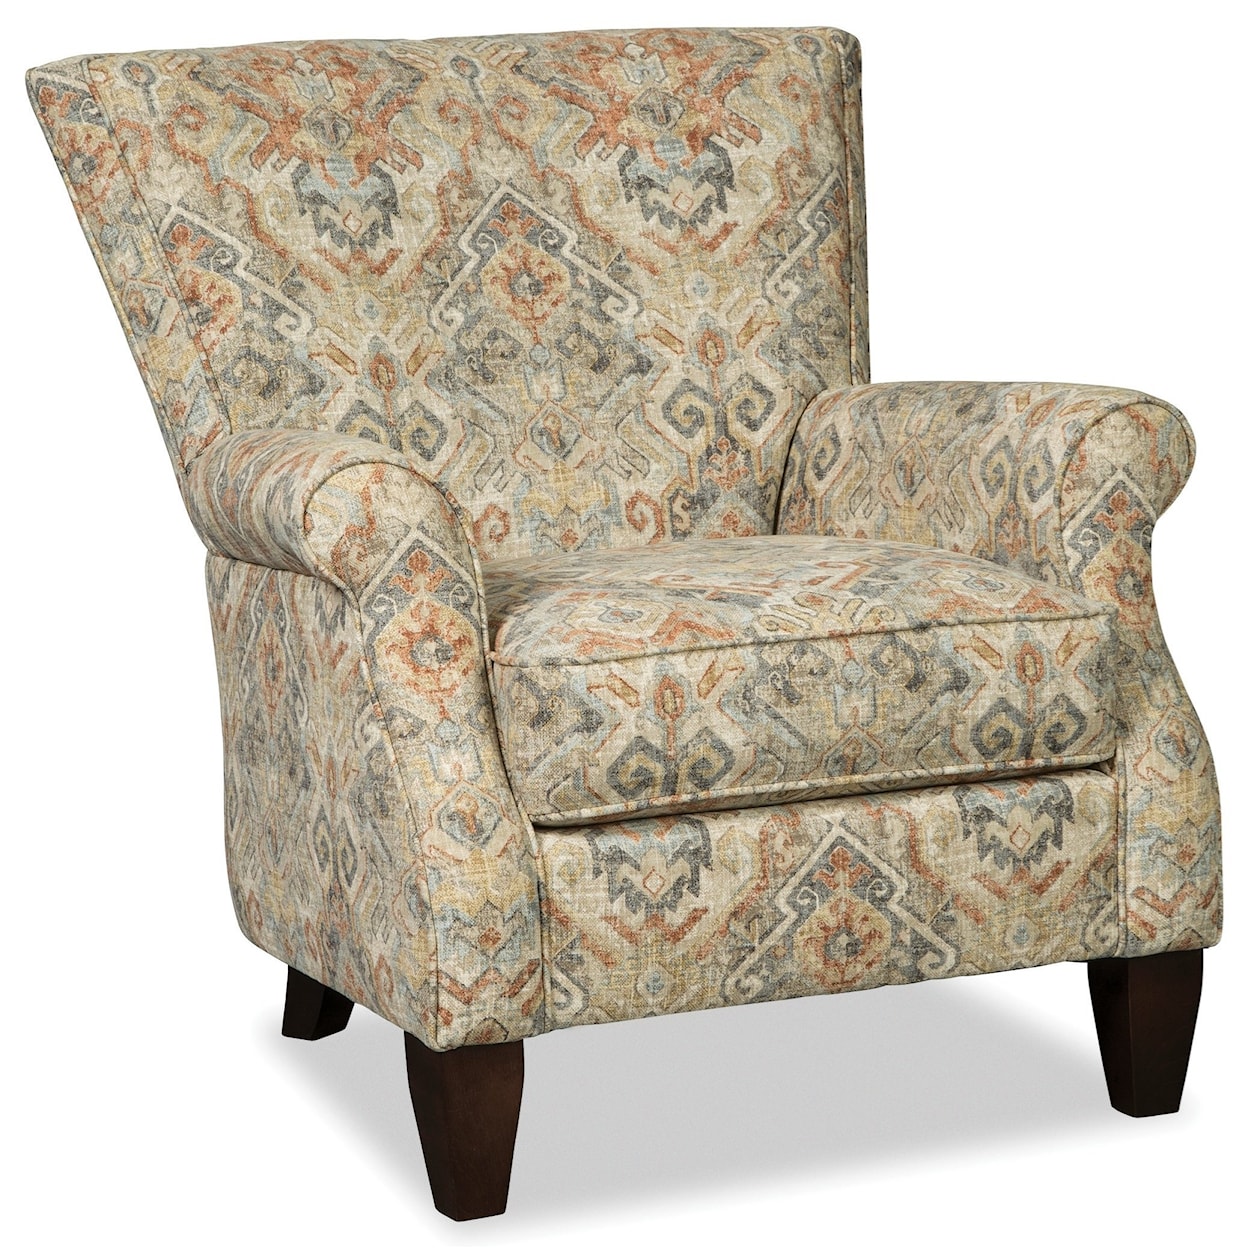 Craftmaster 061310 Upholstered Arm Chair